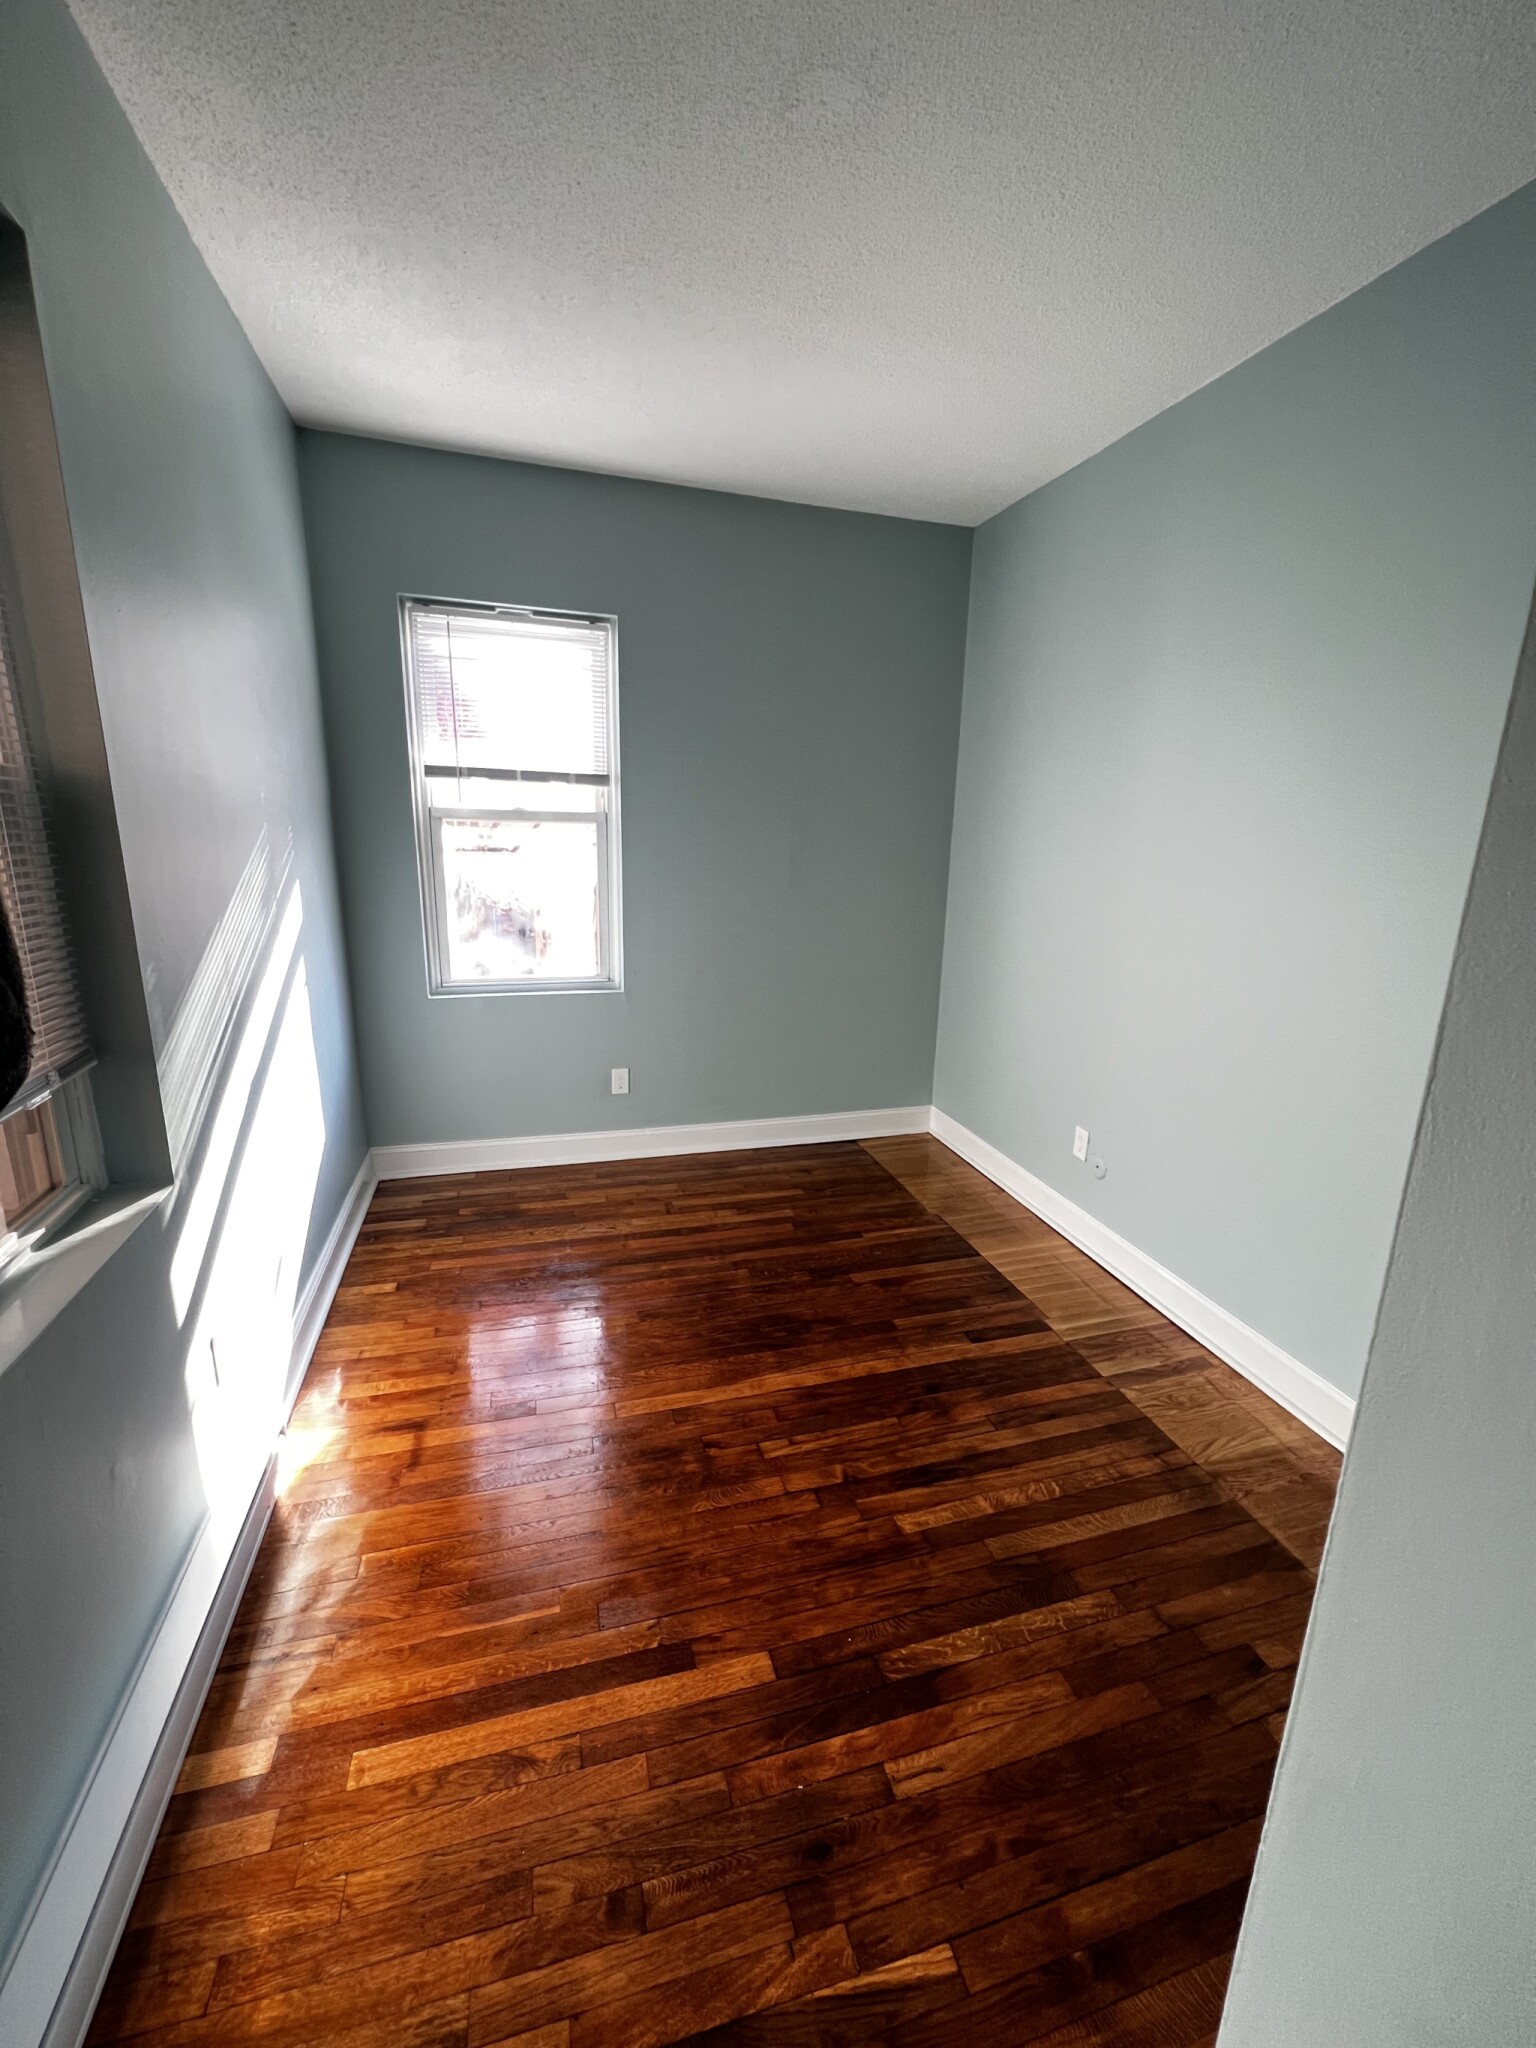 2 Beds, 1 Bath apartment in Boston, Mission Hill for $2,950